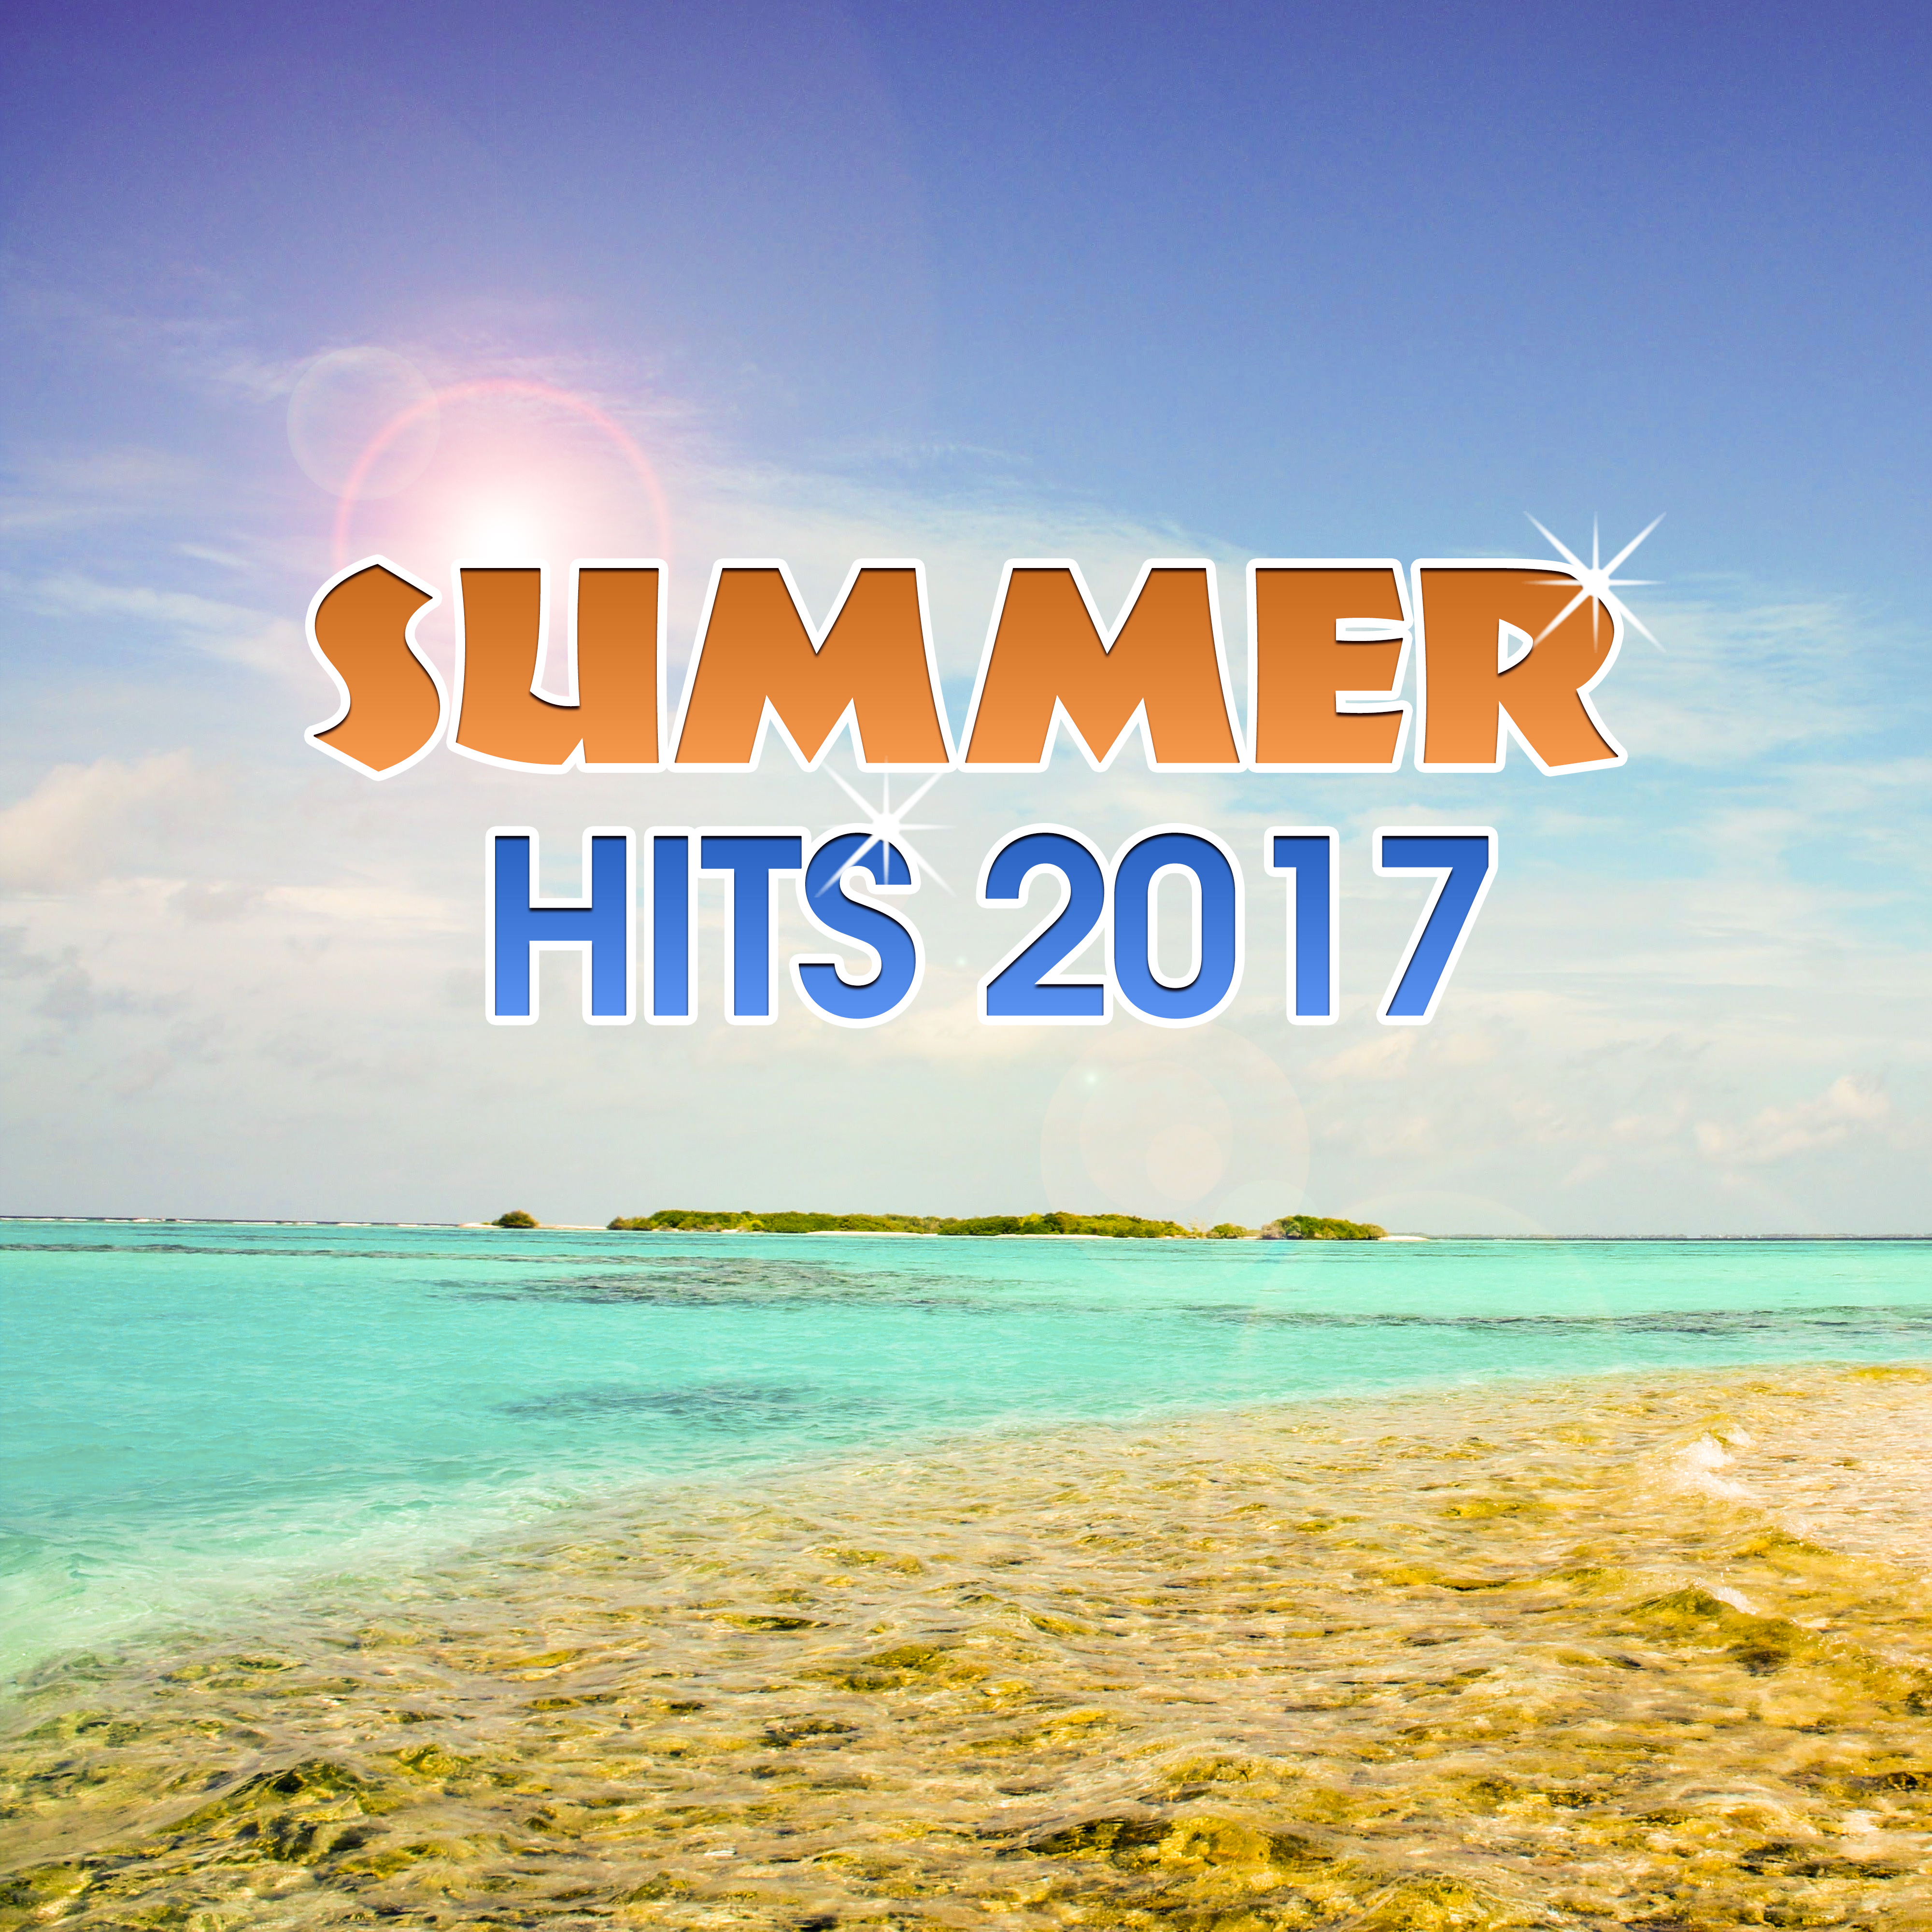 Summer Hits 2017 – Ibiza Chill Out Party, Dancefloor, Beach Party, Summer Chill, Chillout Hits, Ibiza Lounge Club